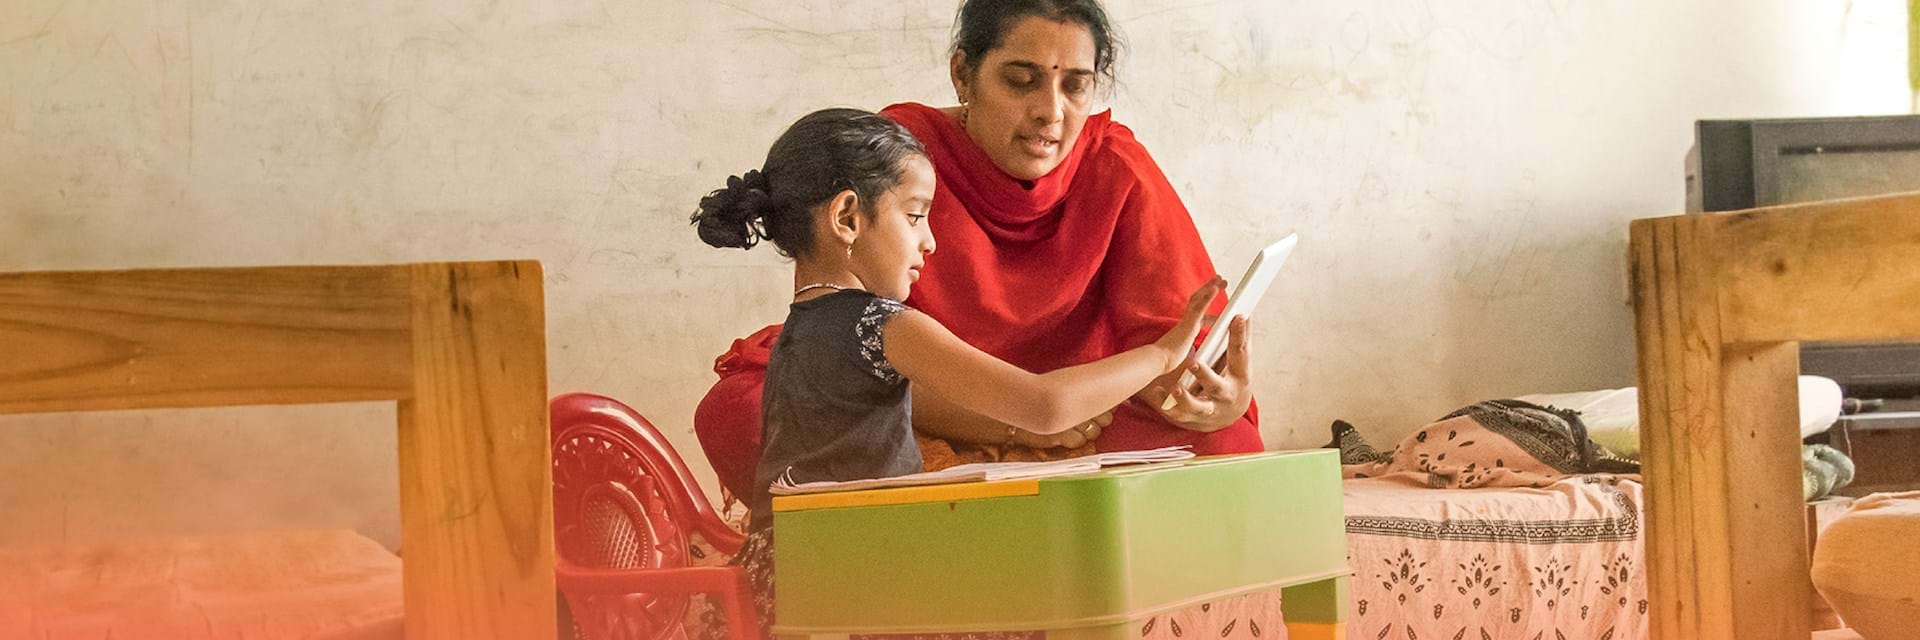 Woman and young girl at table - India's development sector adapting to the new ecosystem whitepaper